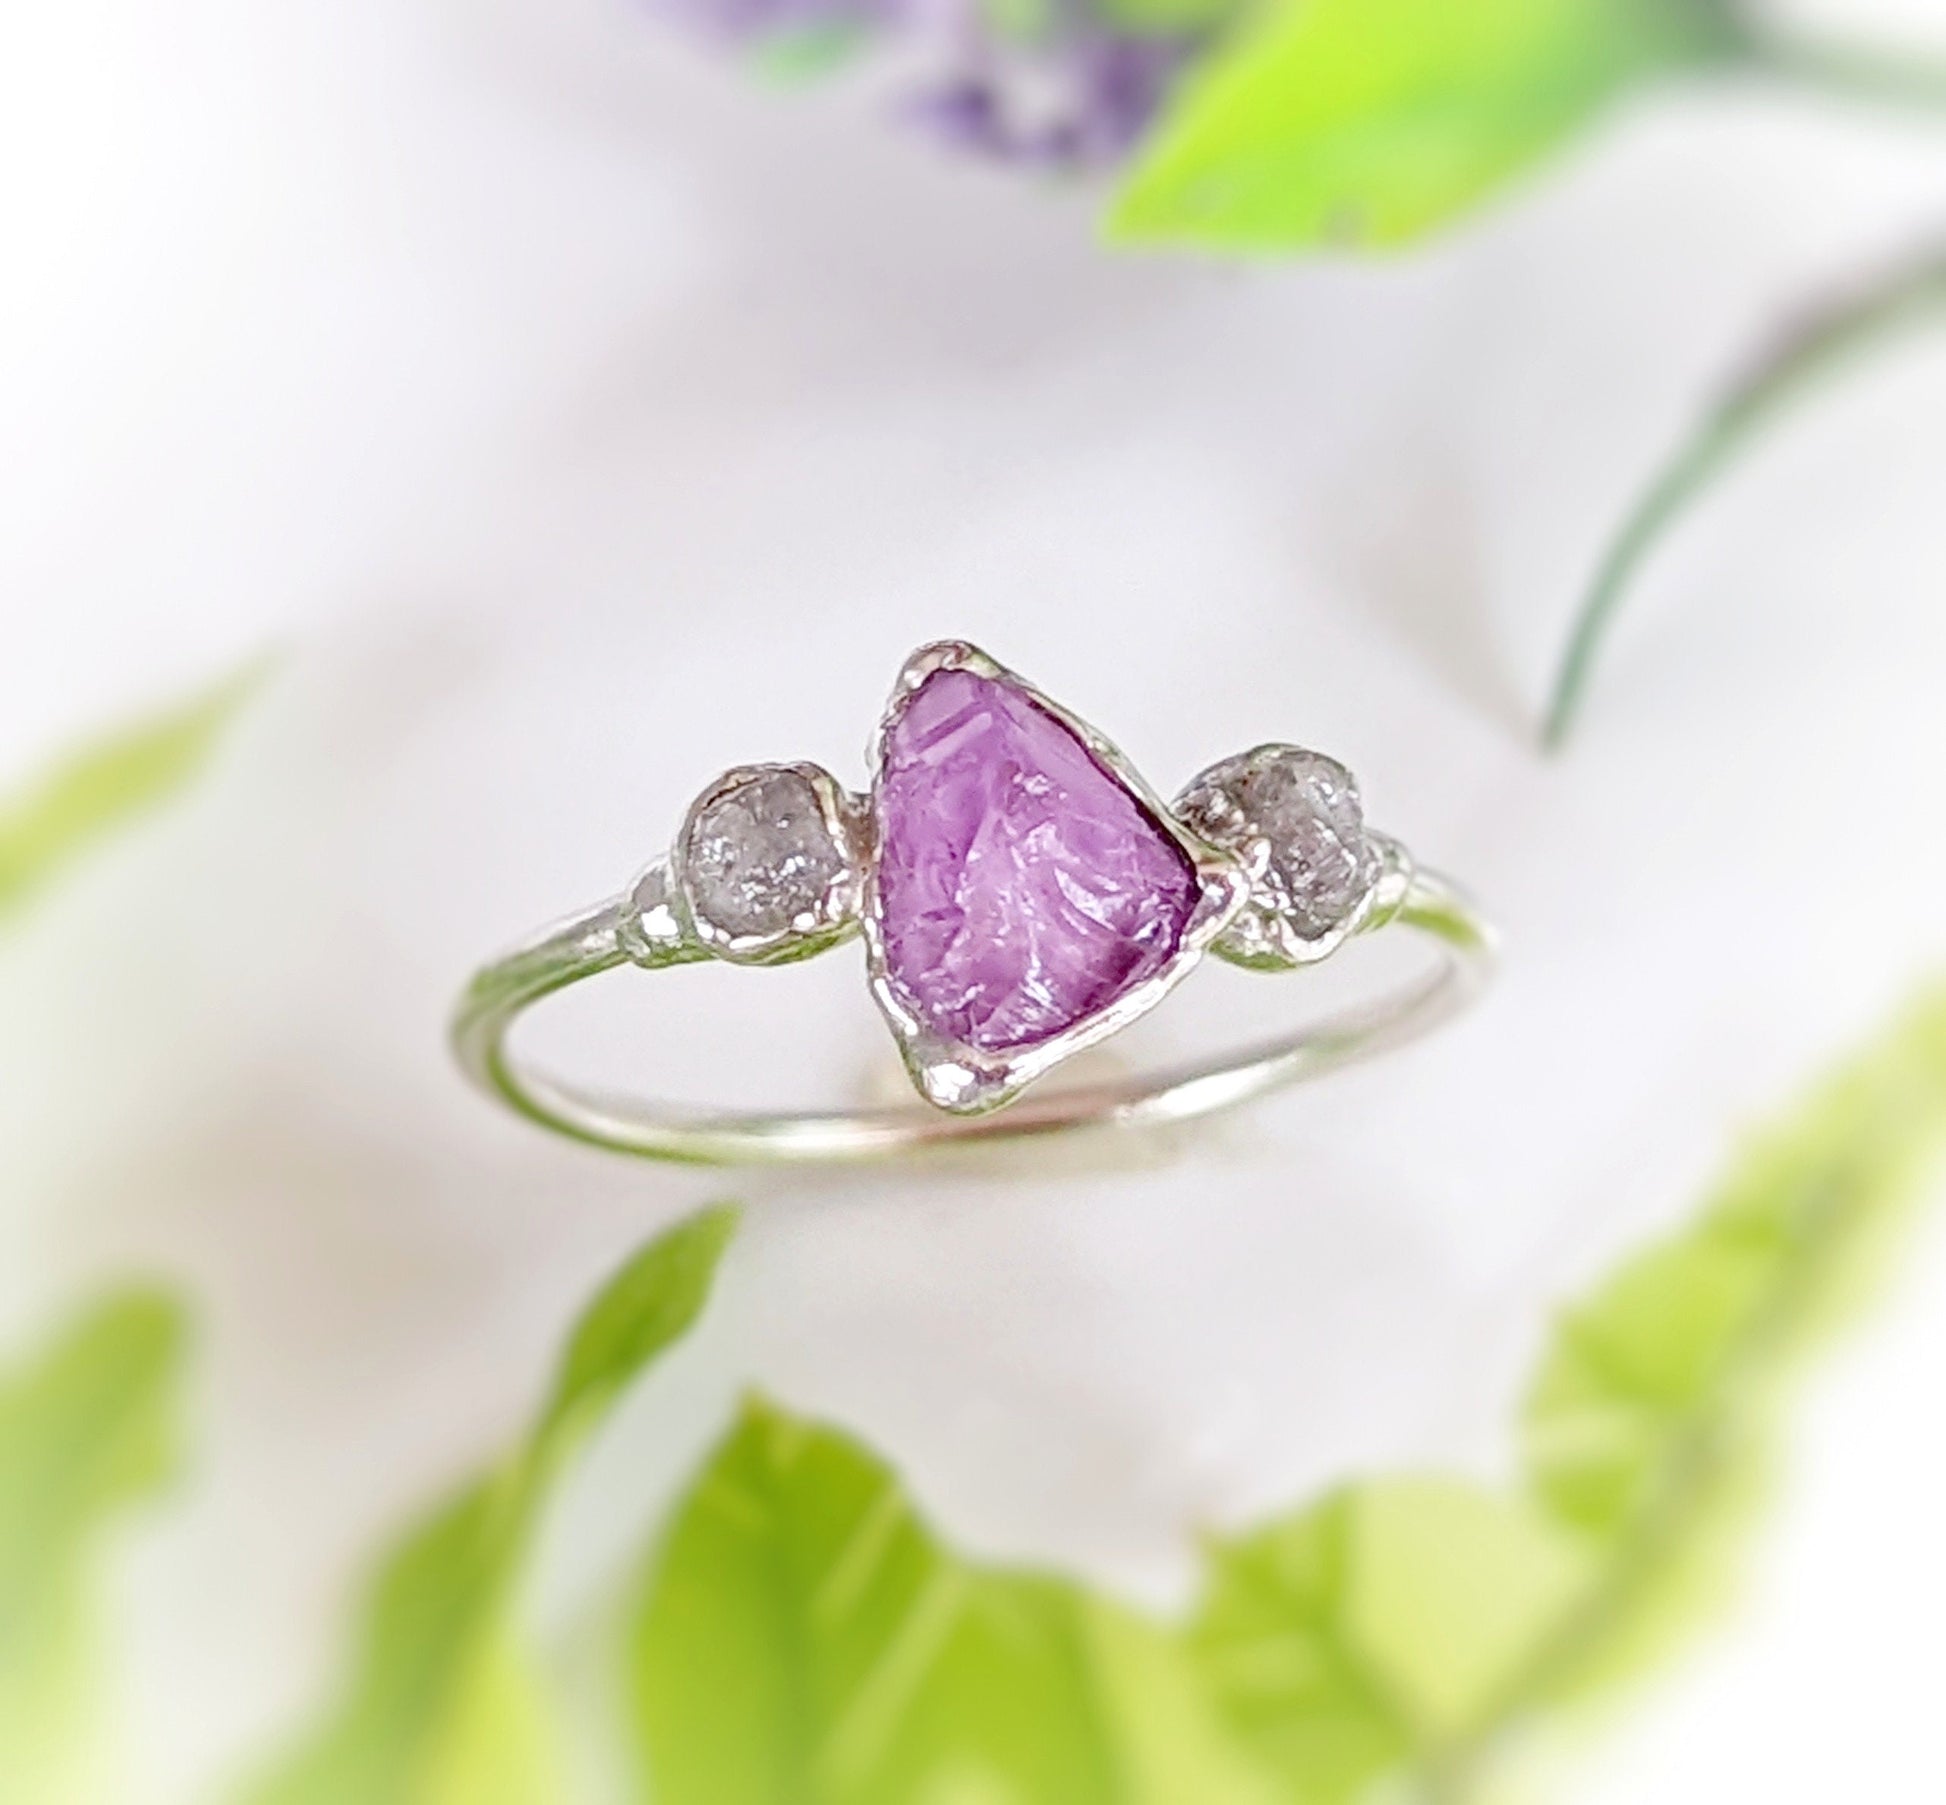 Raw Alexandrite and rough diamond Engagement ring in Fine 99.9 Silver